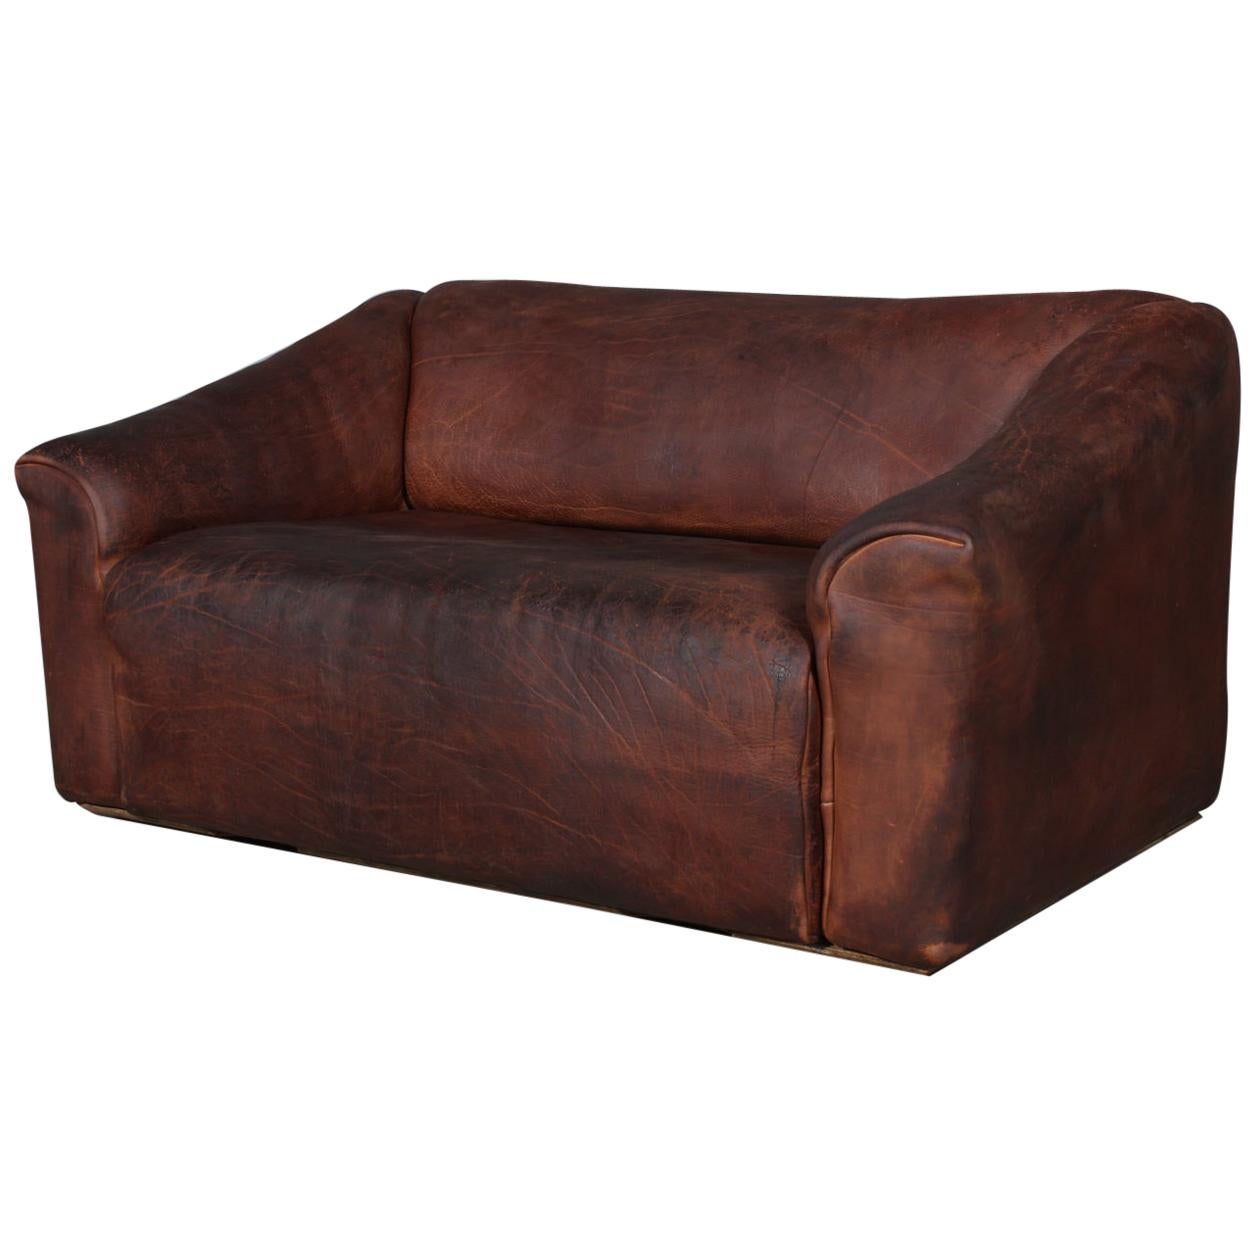 Vintage De Sede Two-Seat Sofa, DS47, Patinated Leather